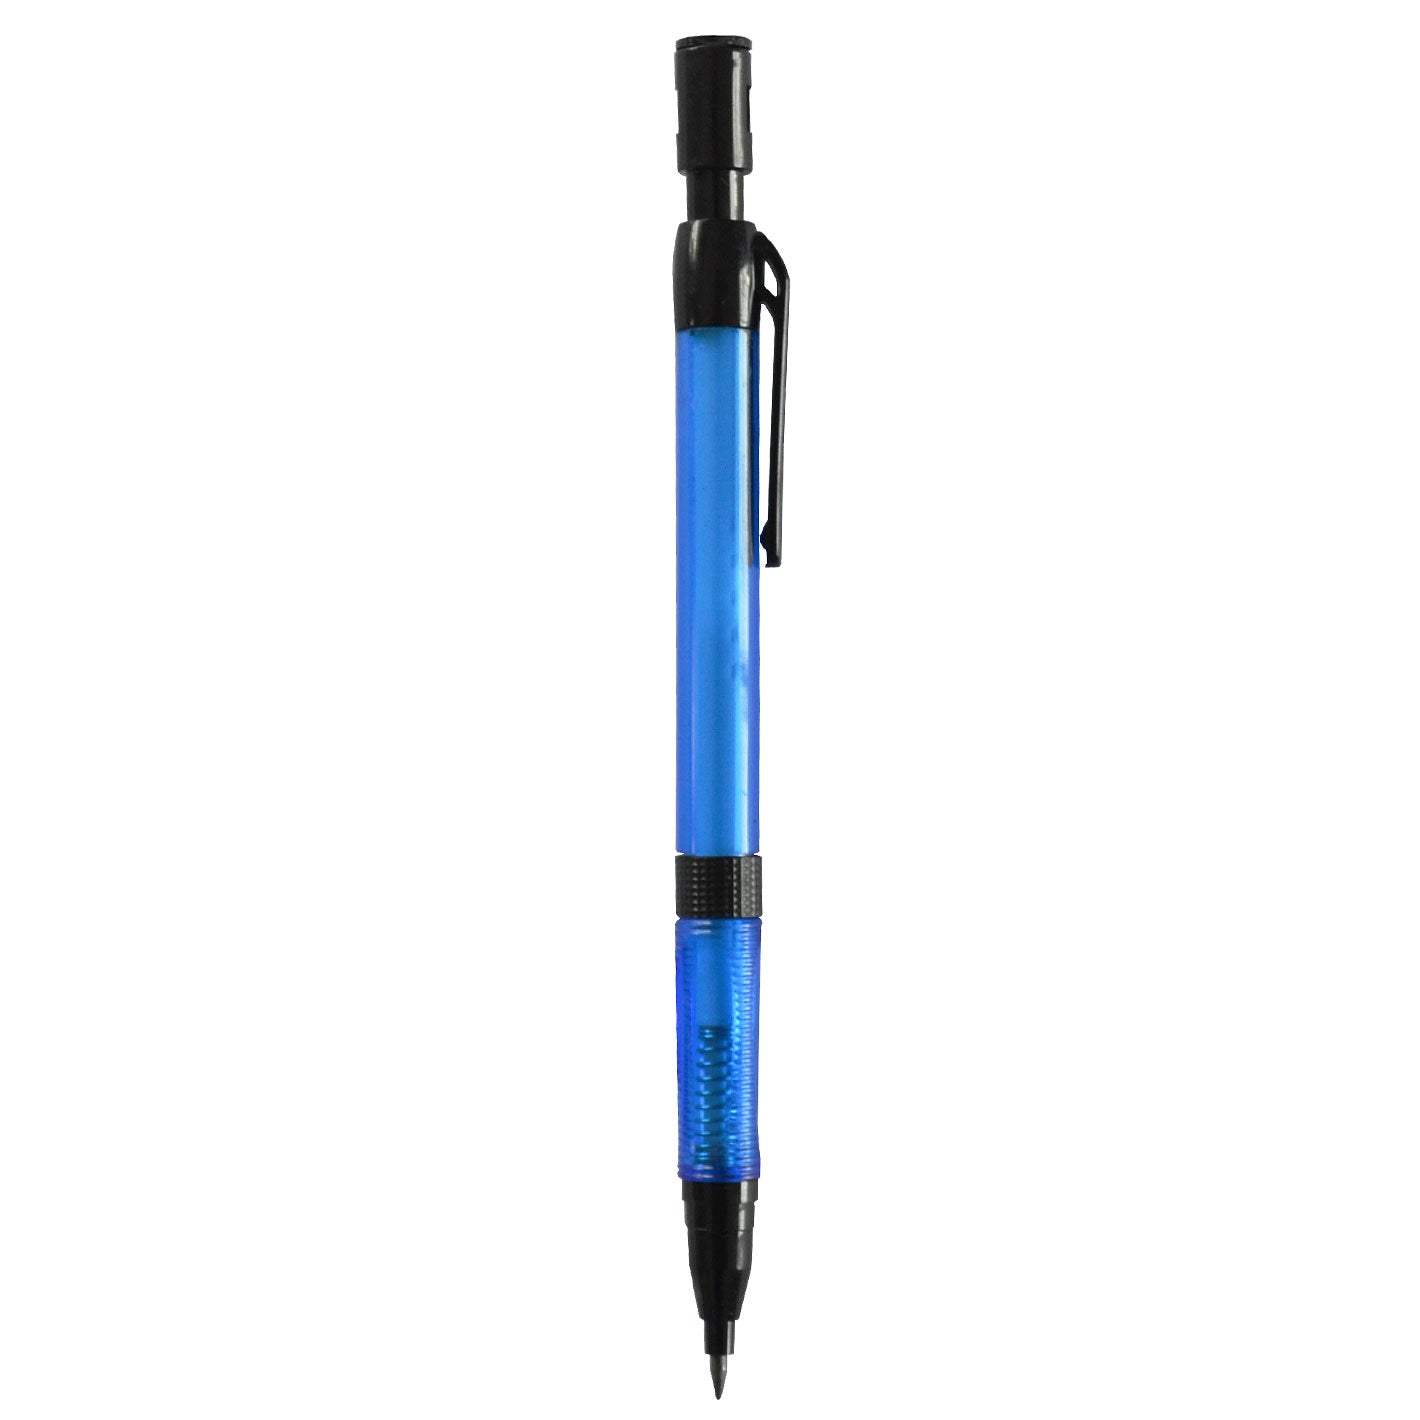 Tyco Triangular HB Mechanical Pencil TY-520 With Lead Sharpener 2.00mm Blue